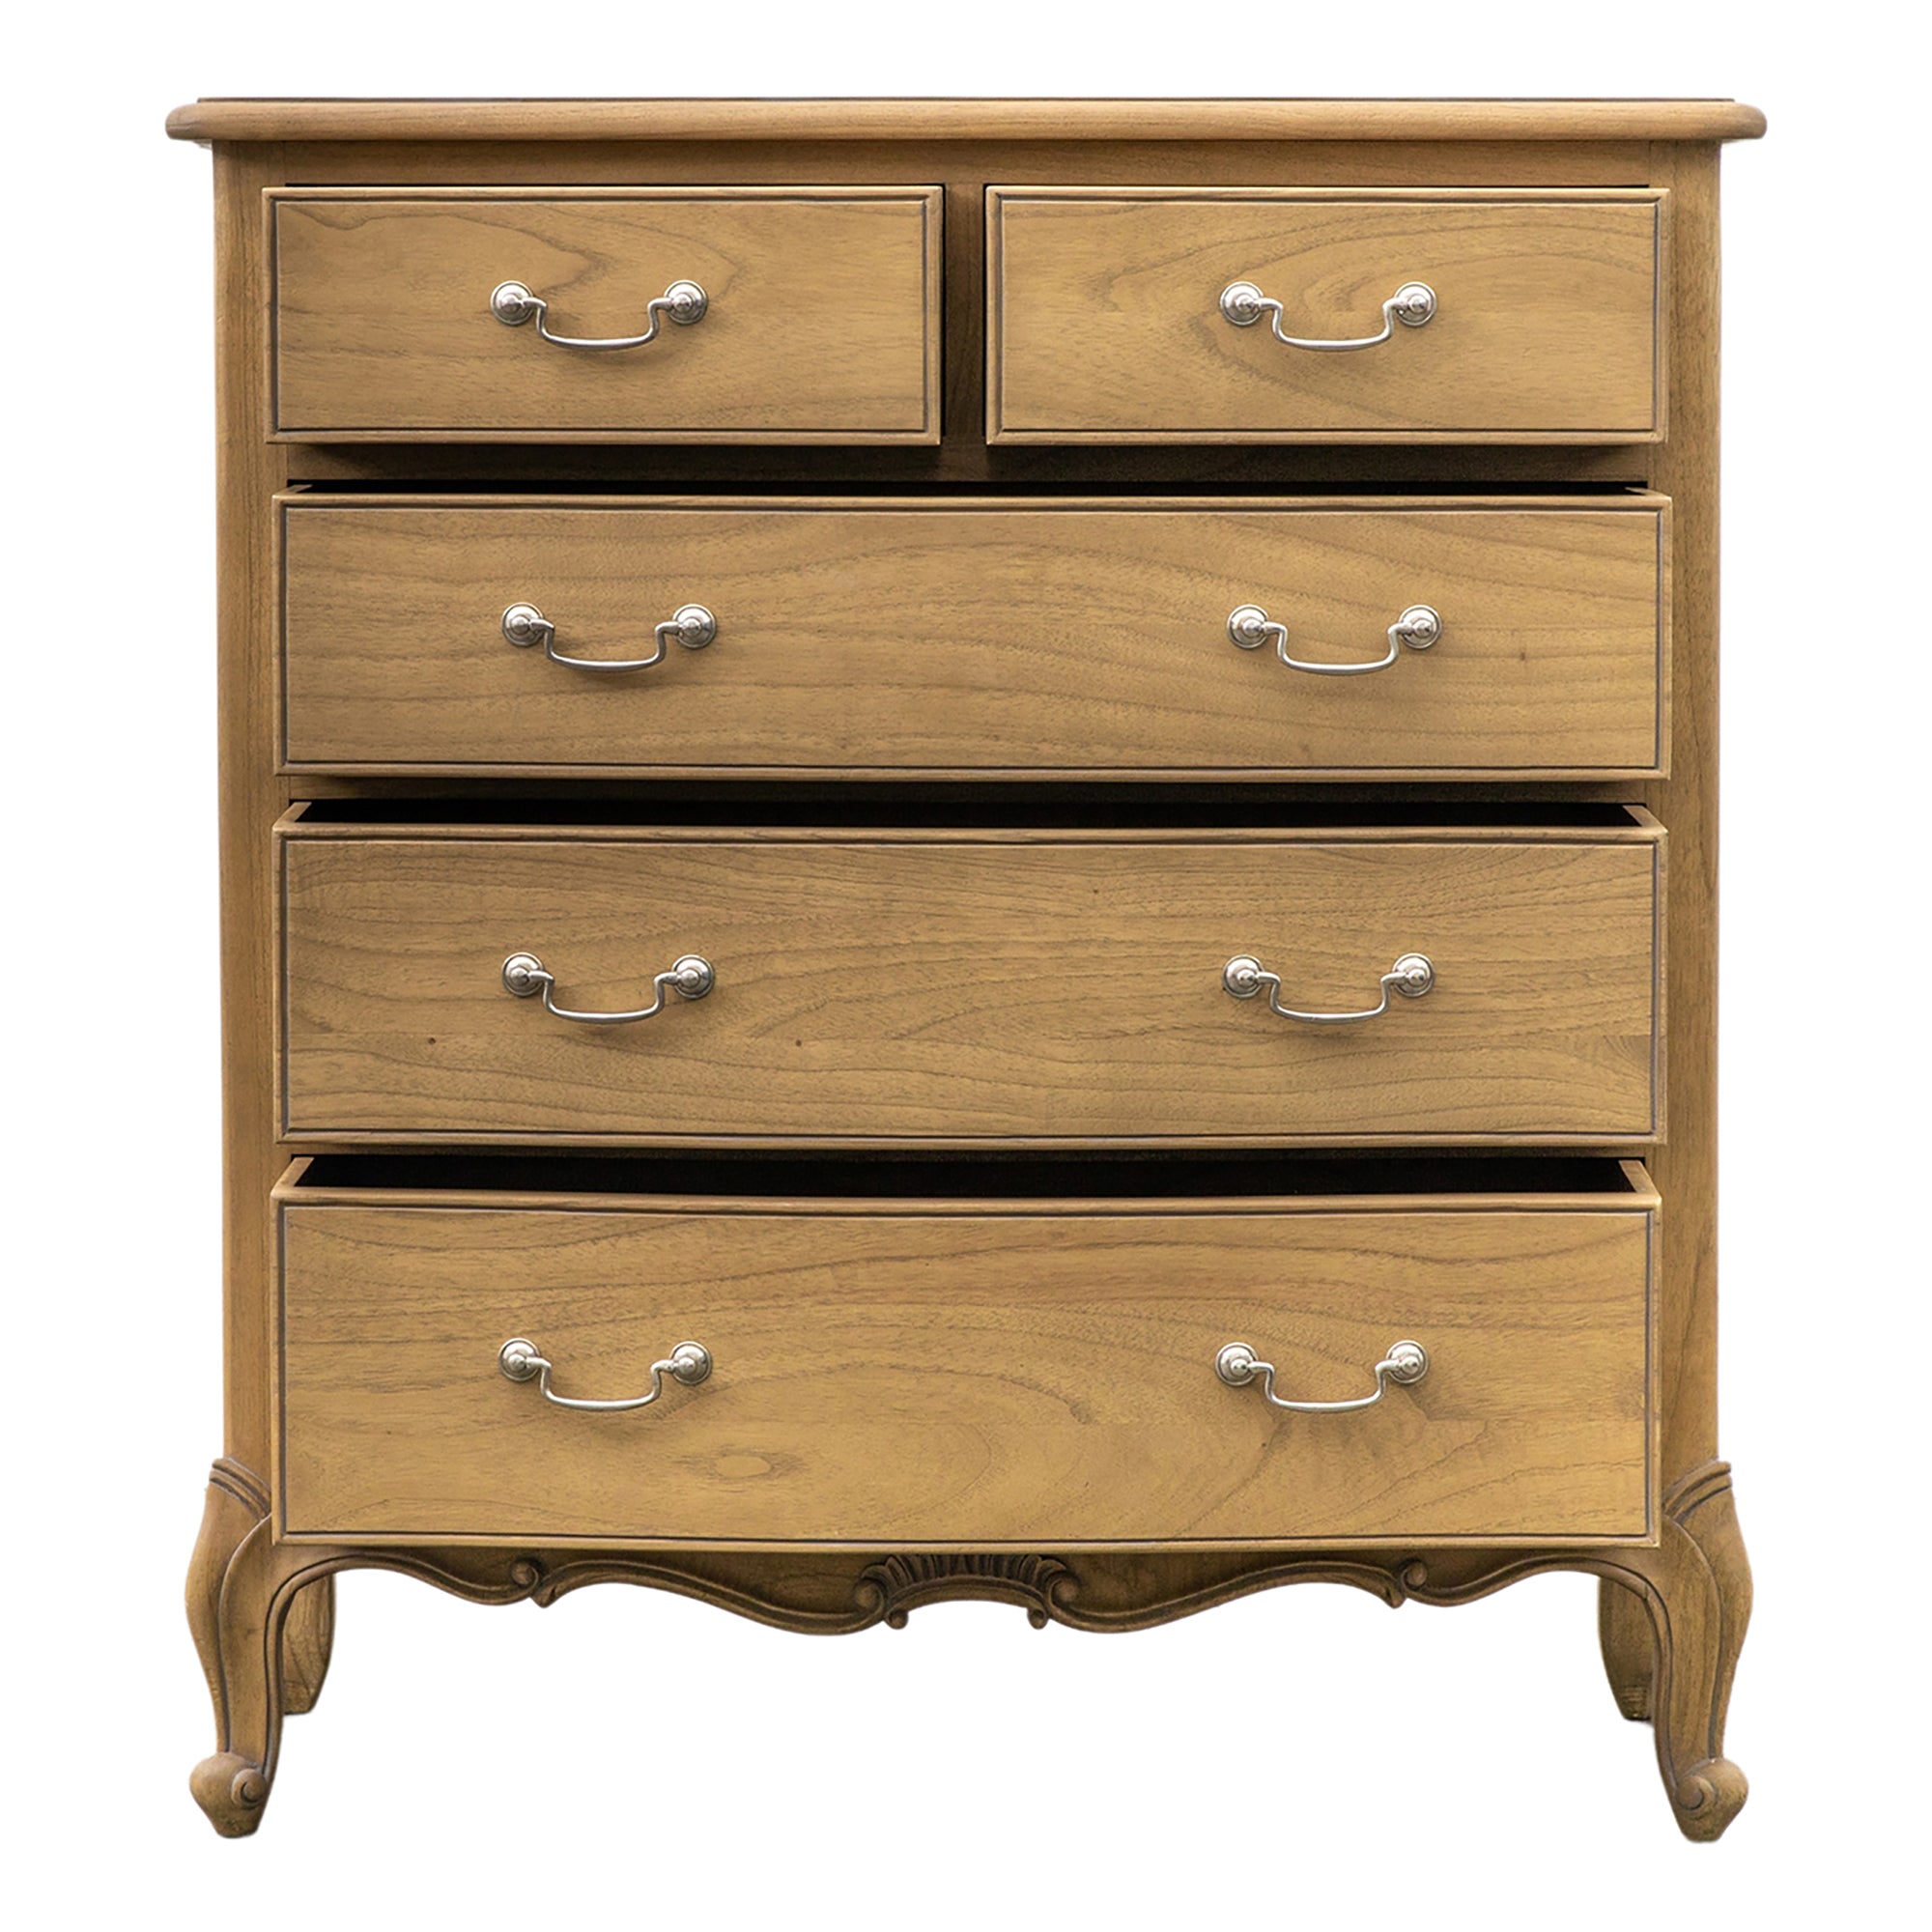 French Chic Wooden Tall Chest of Drawers